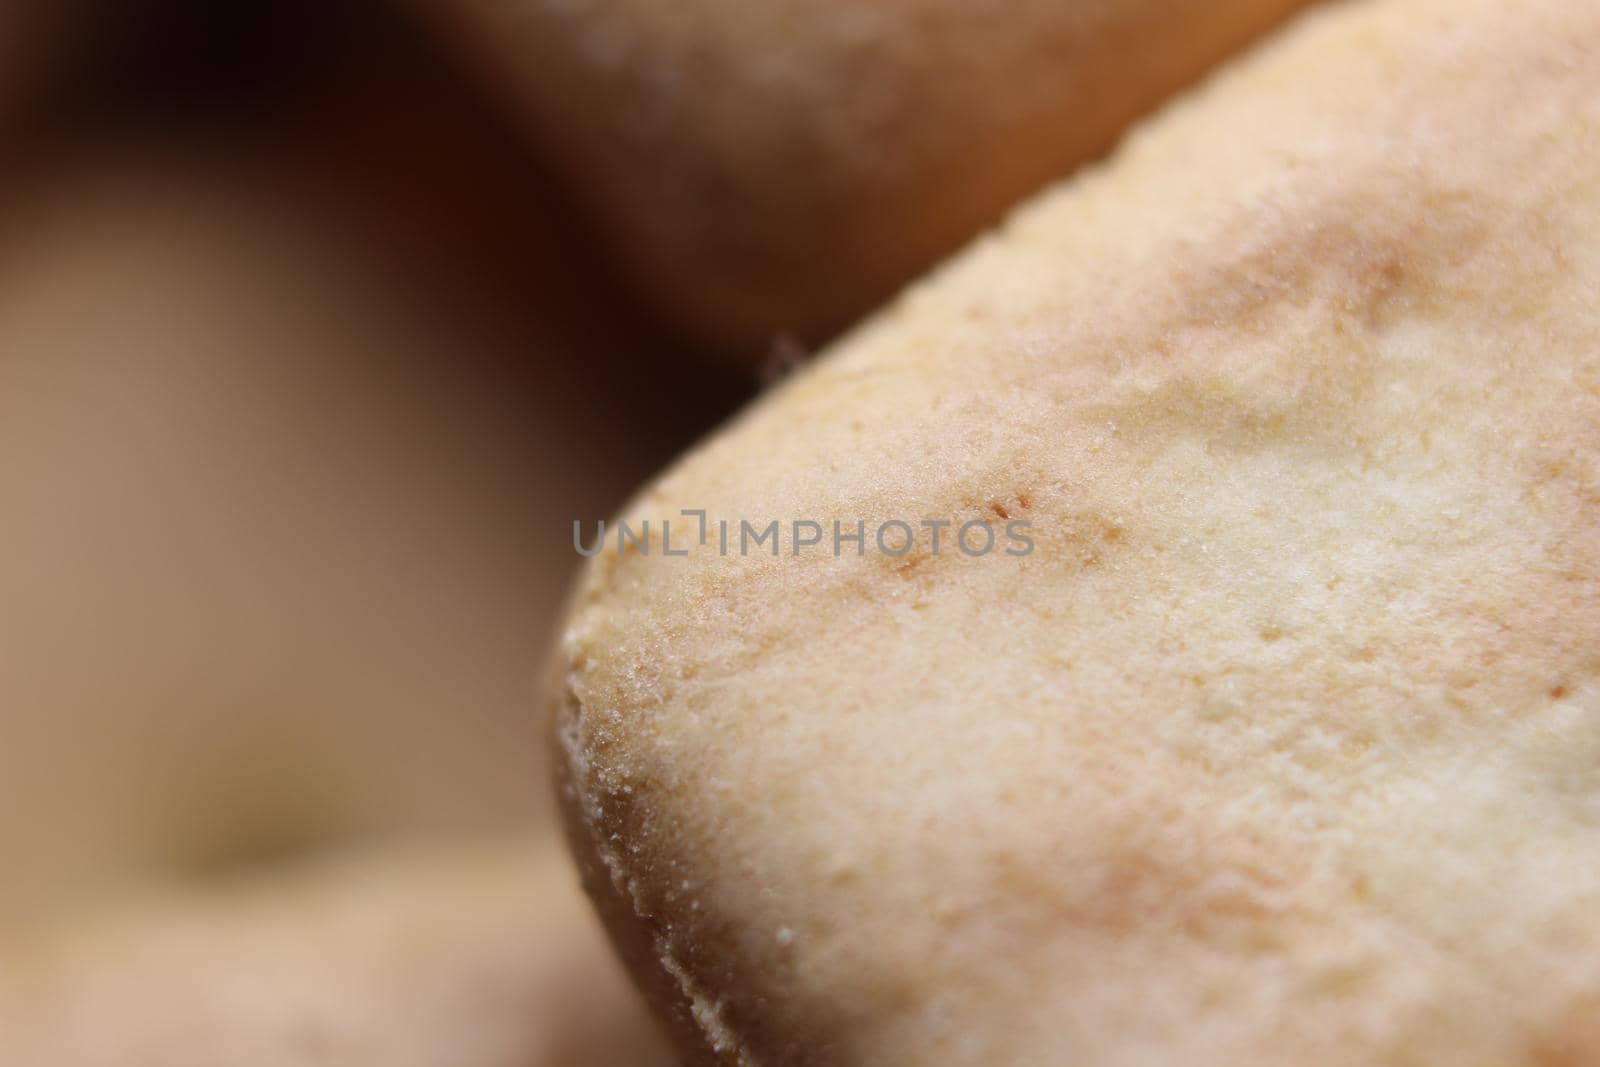 Close up view rectangular biscuits with small pores by Photochowk